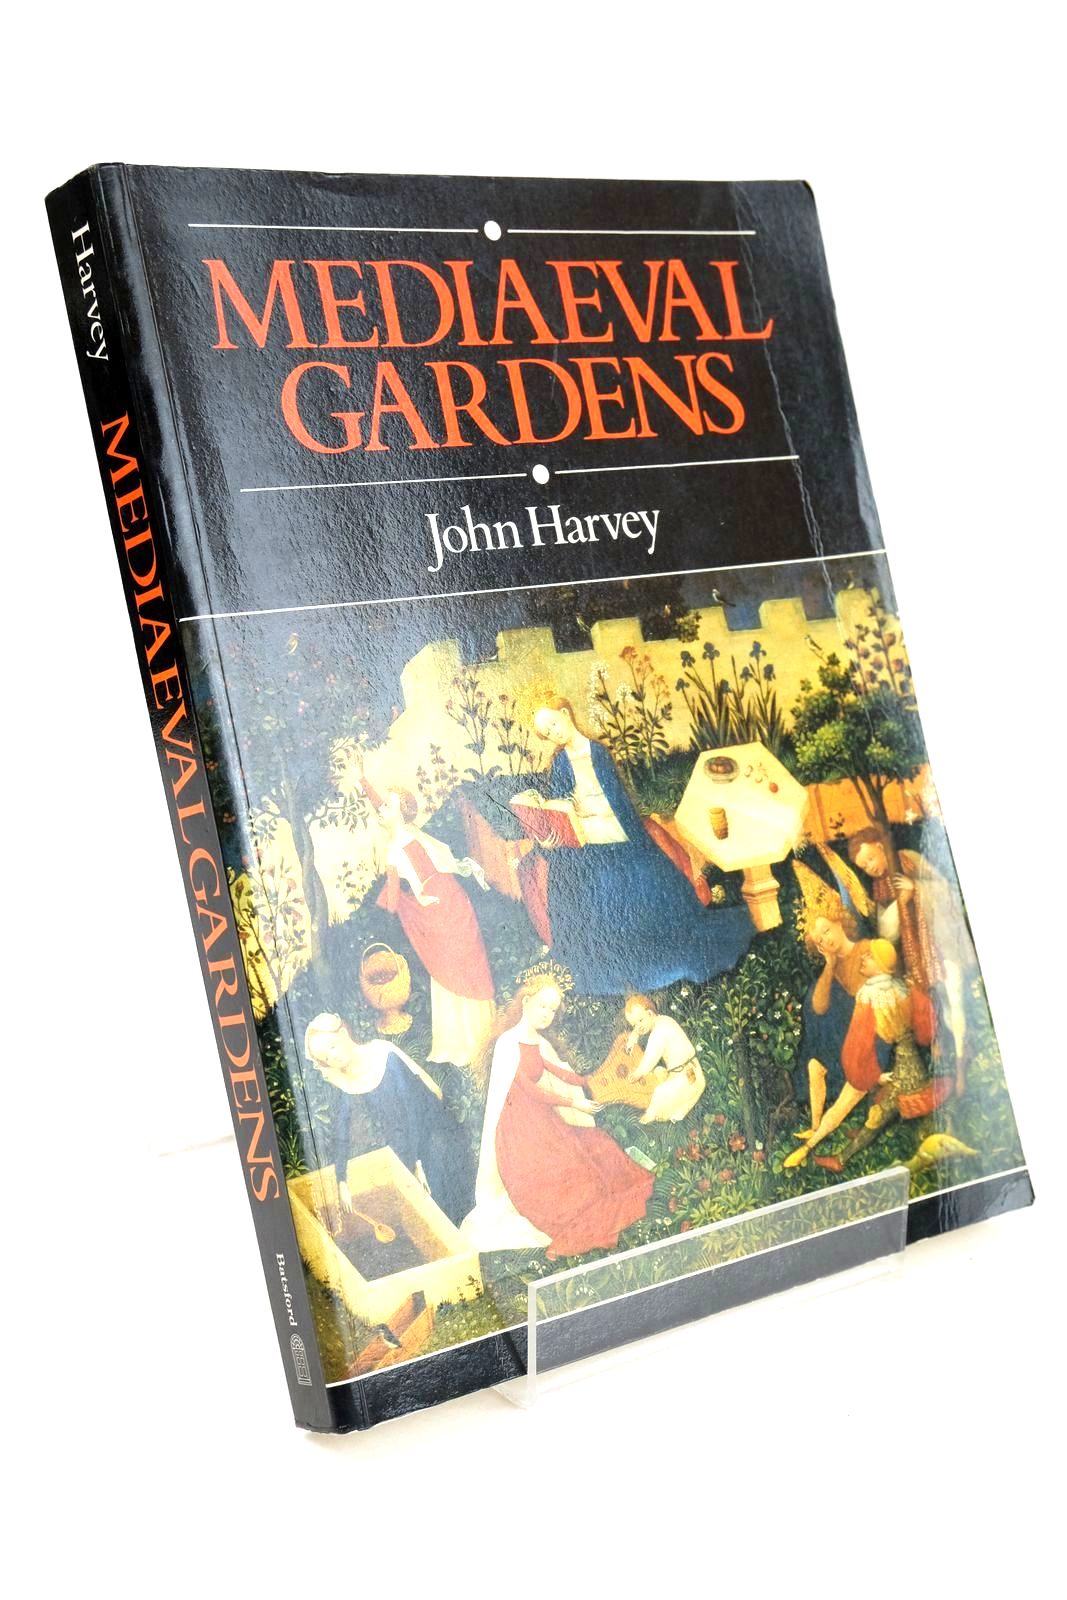 Photo of MEDIAEVAL GARDENS written by Harvey, John published by B.T. Batsford Ltd. (STOCK CODE: 1326137)  for sale by Stella & Rose's Books